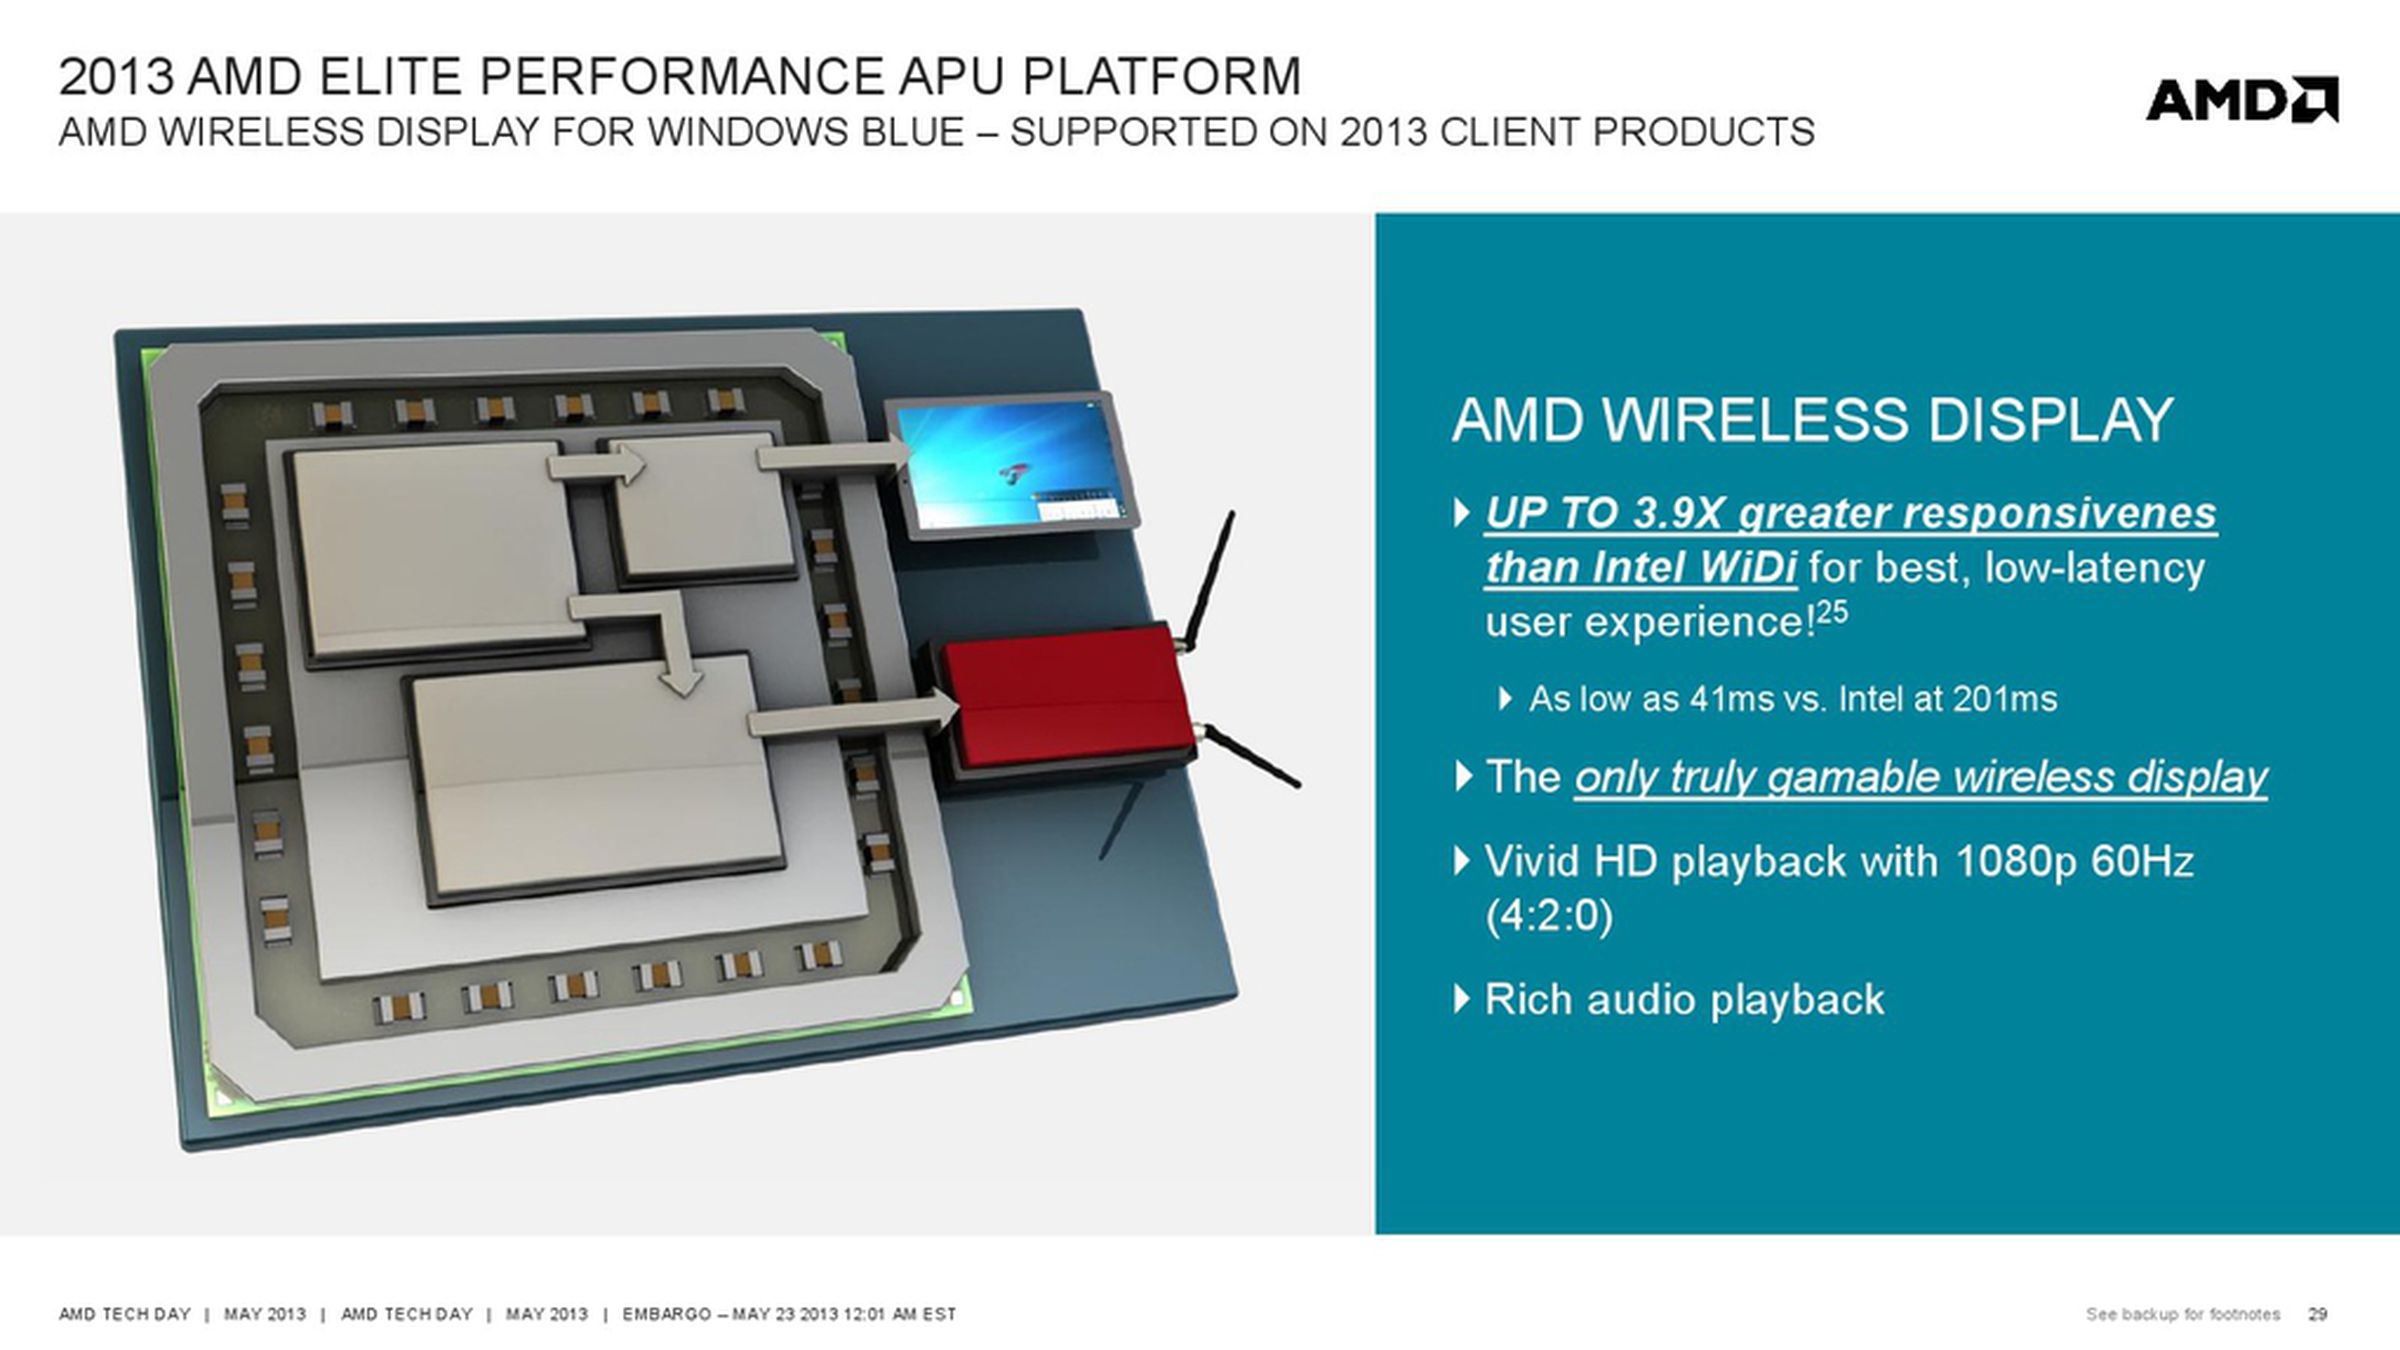 AMD Temash, Kabini, and Richland features and performance claims